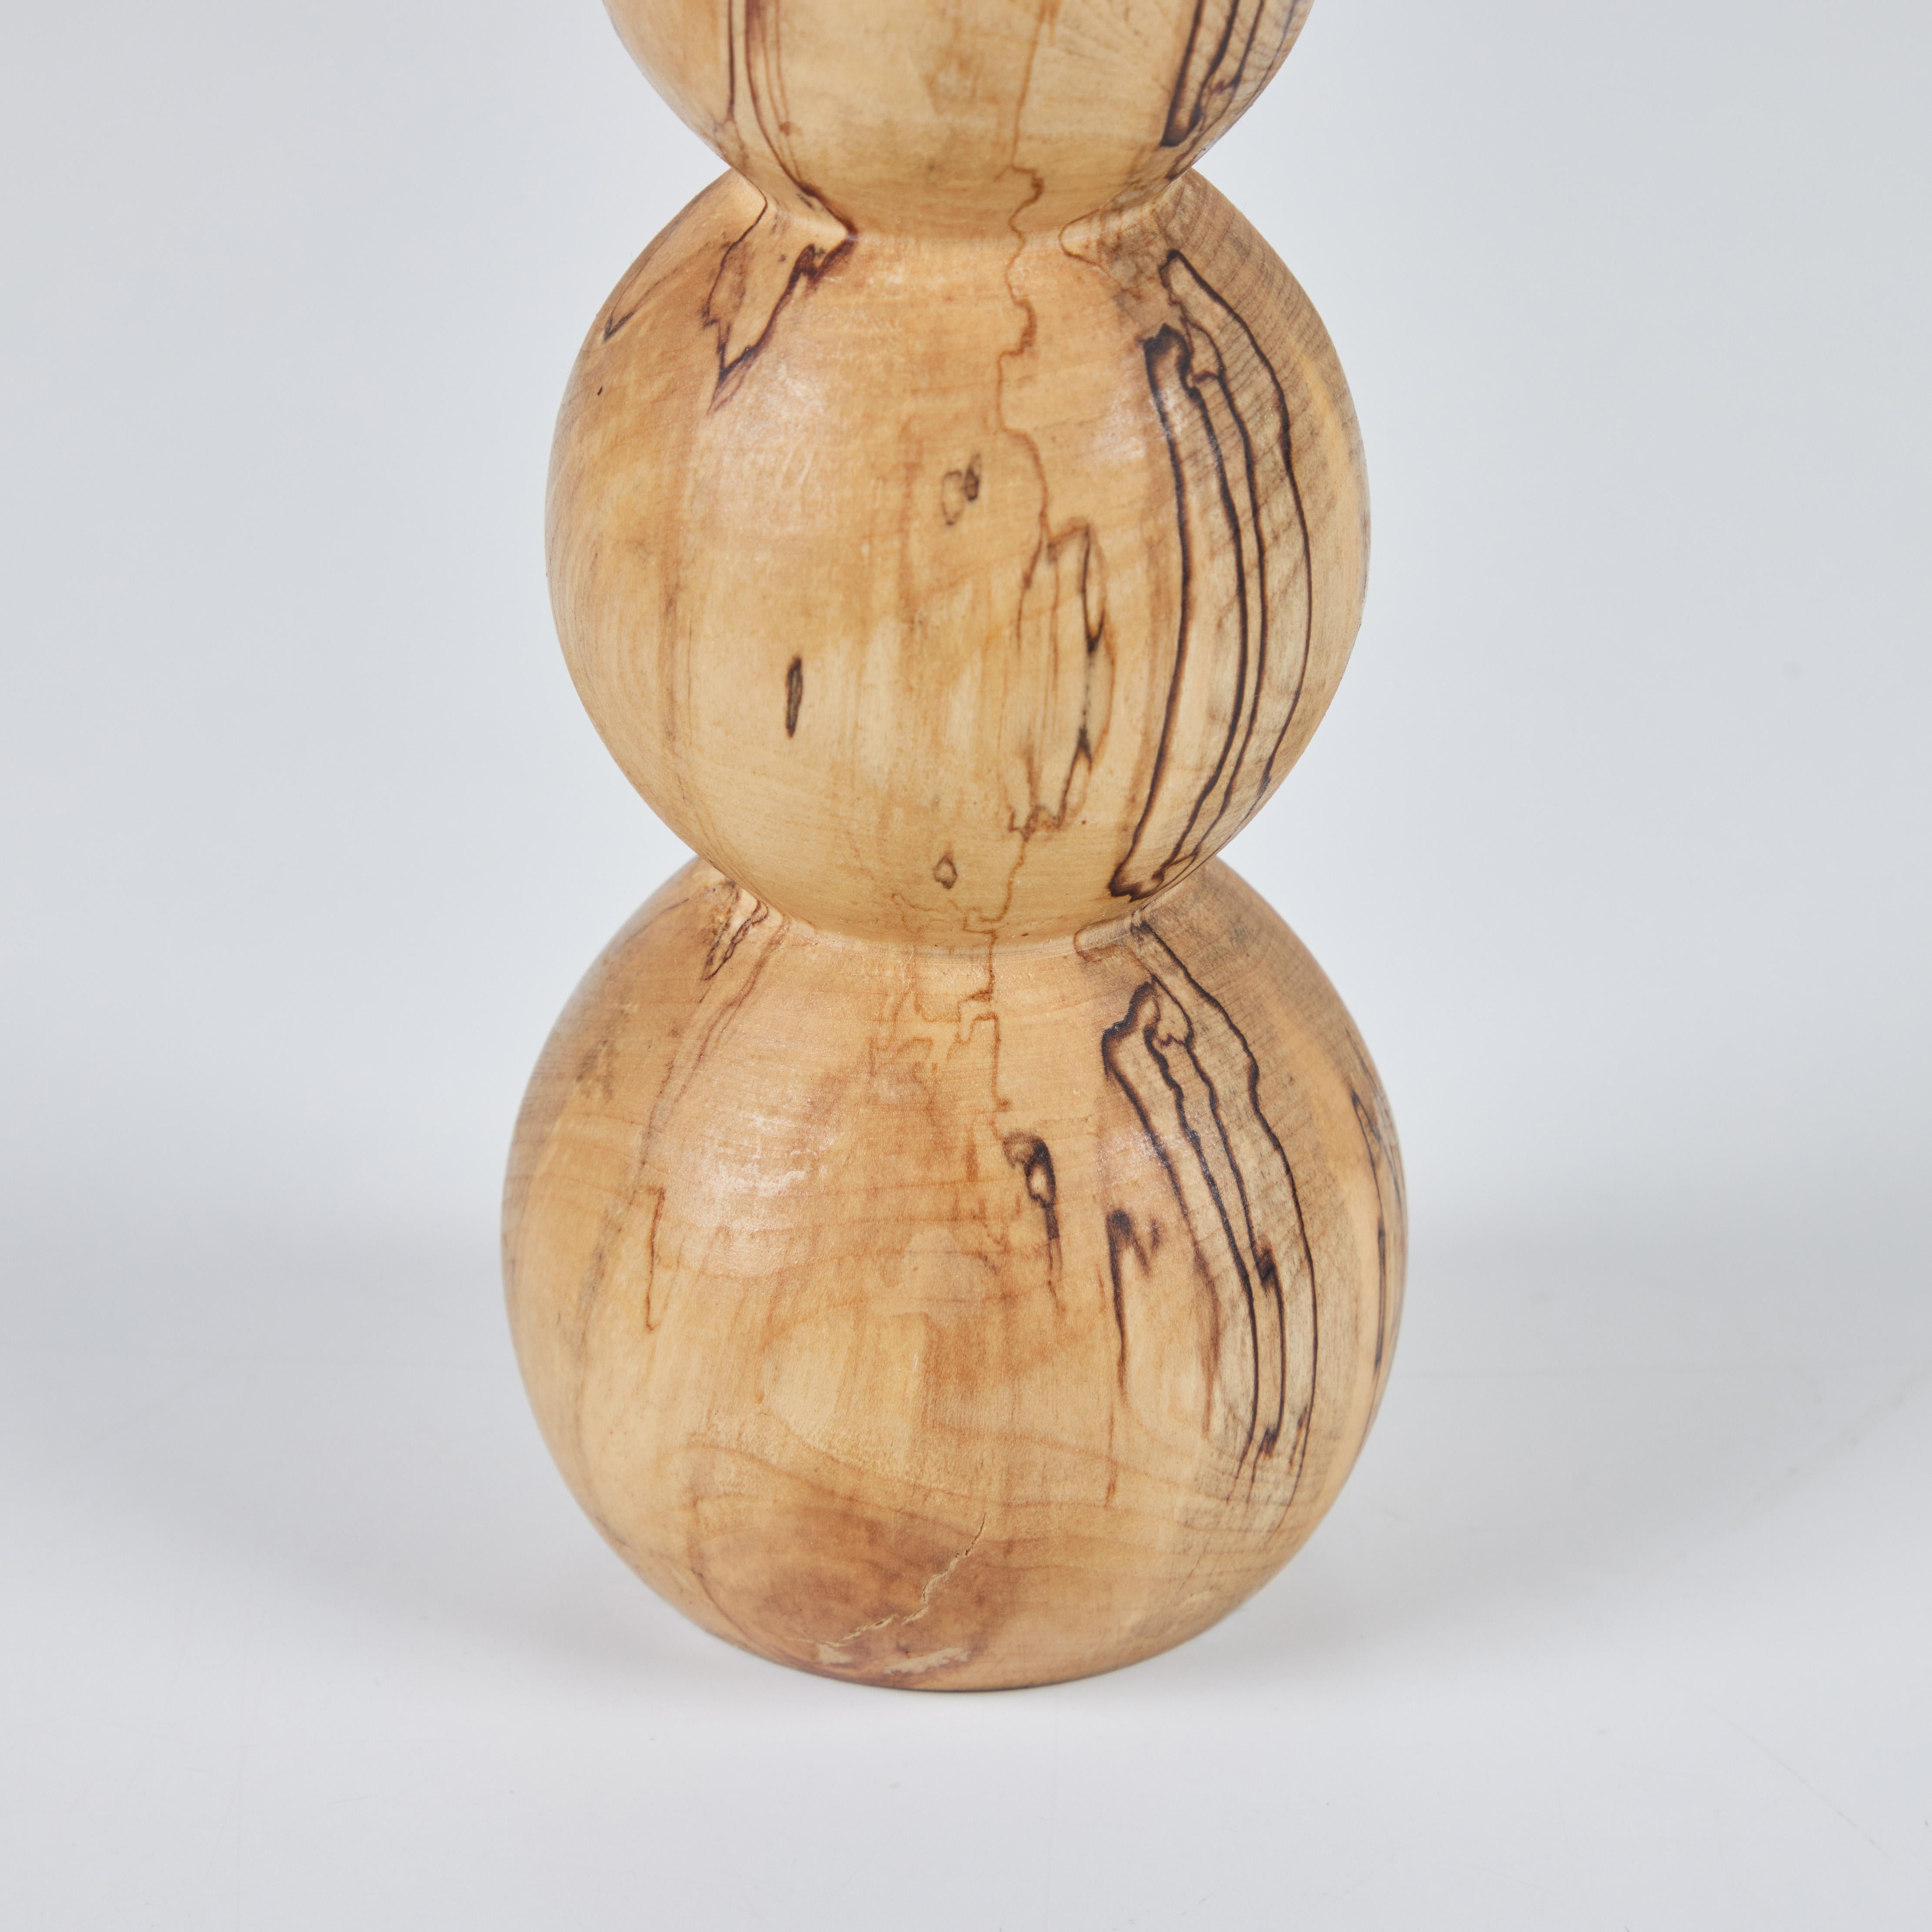 Hand Turned Spalted Birch Bubble Candlestick Holder by Evan Segota For Sale 4